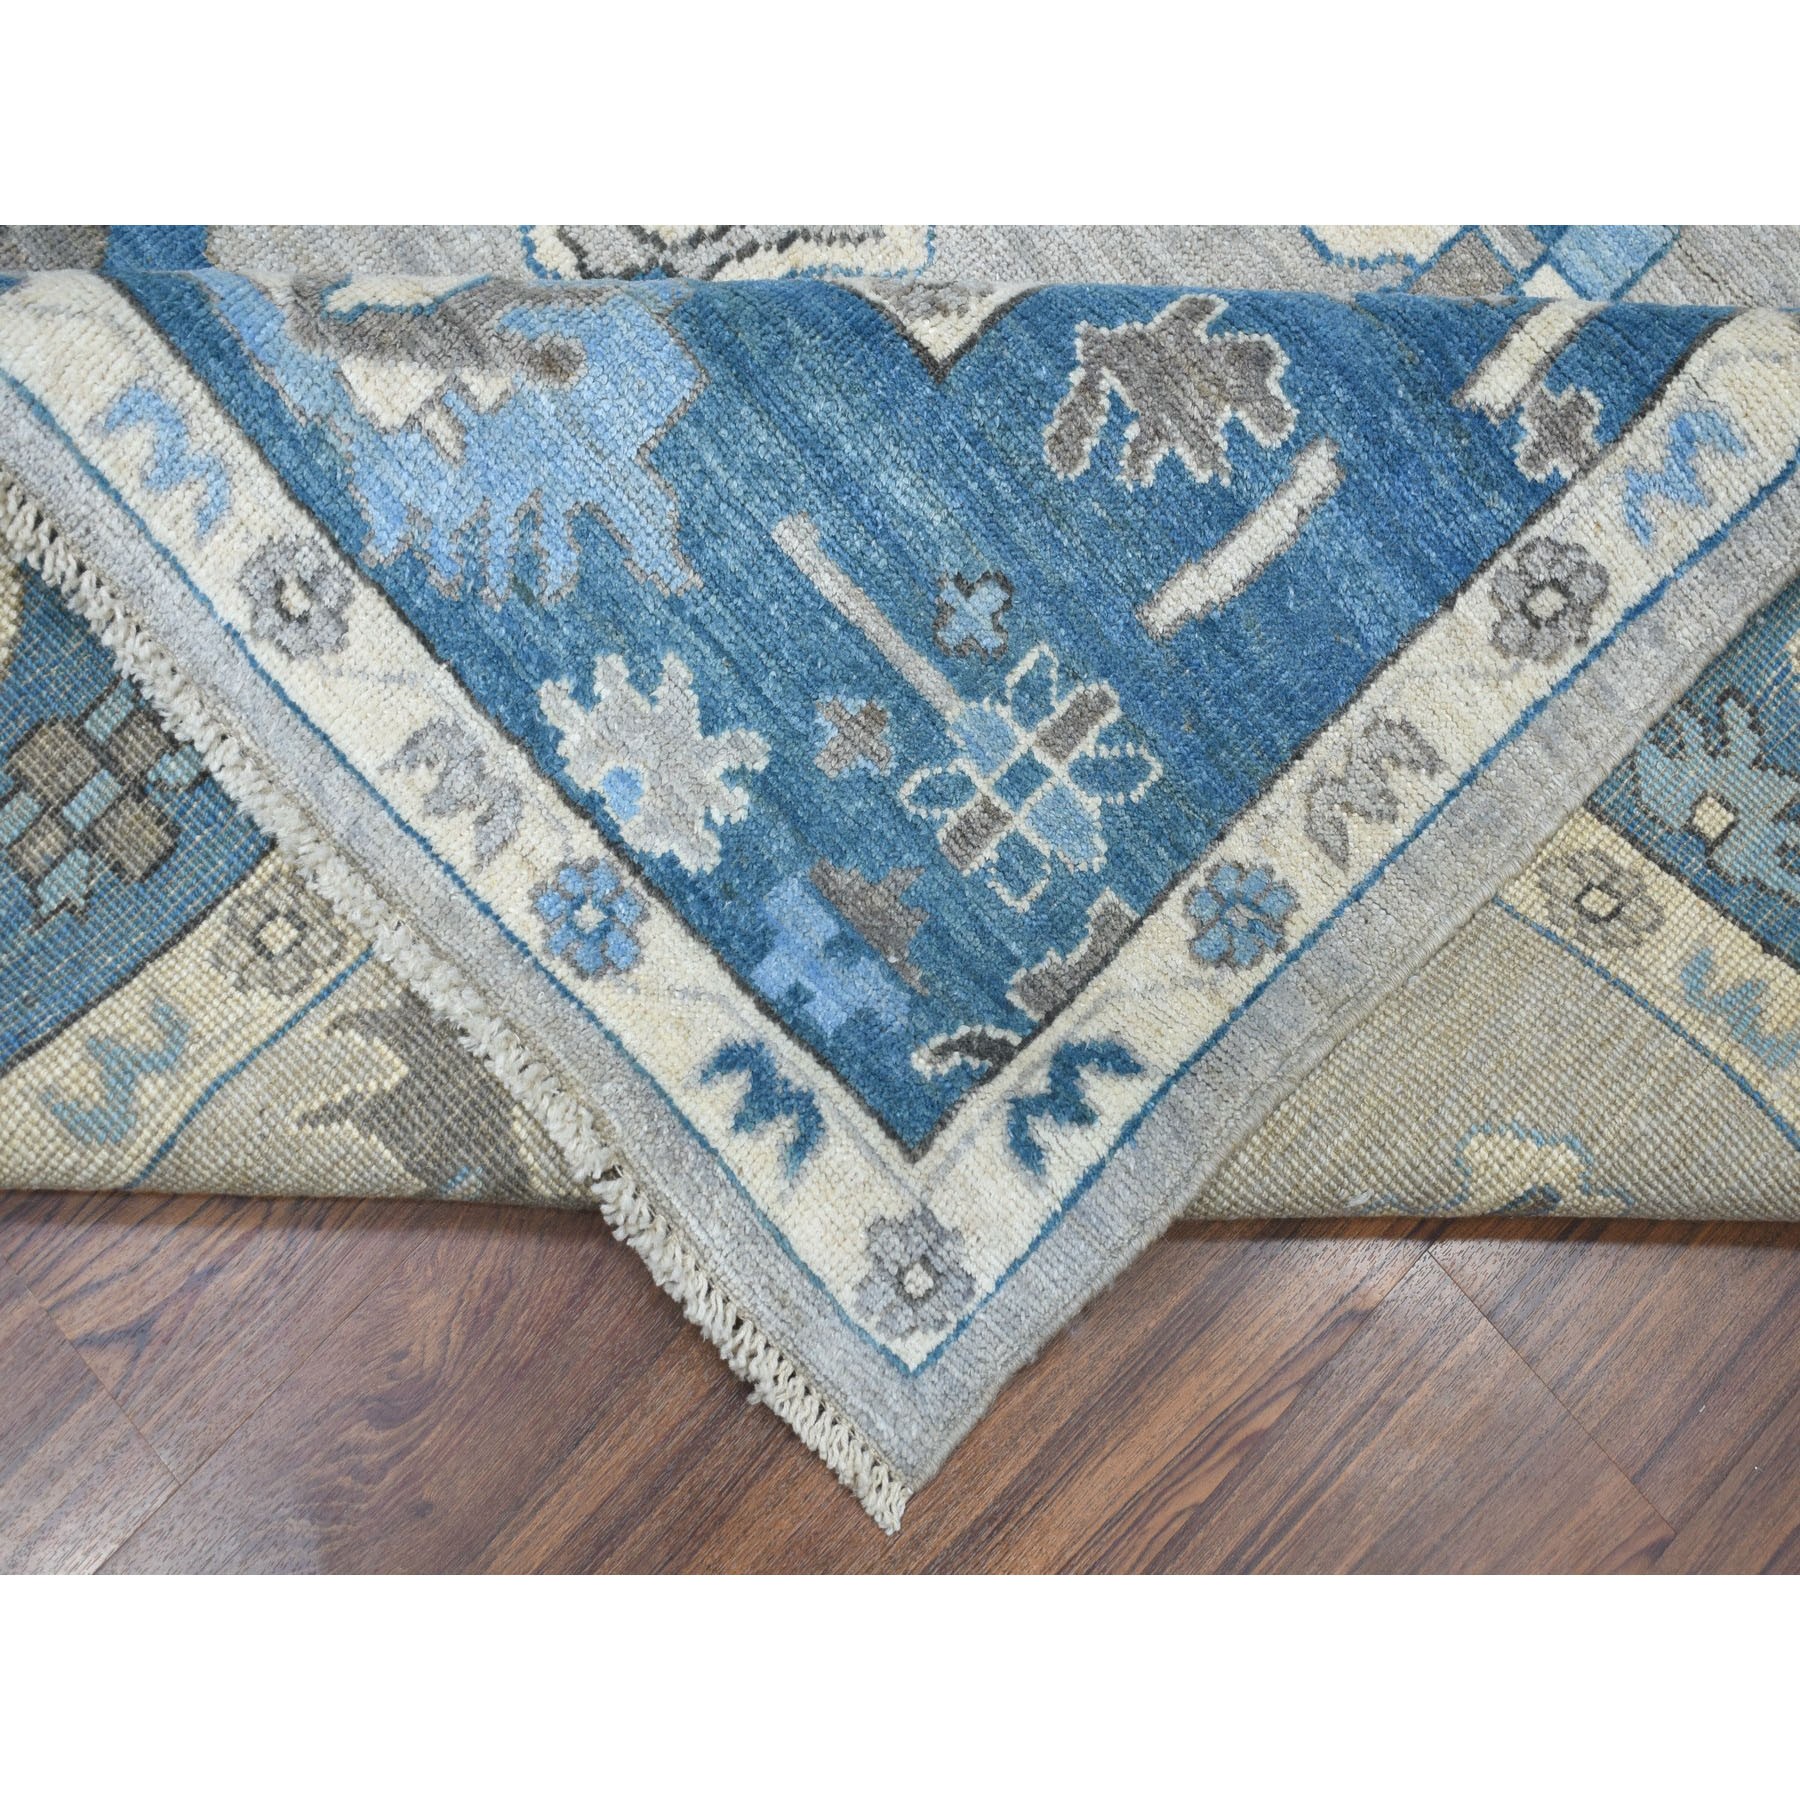 8-1 x9-9  Soft Angora Pure Wool Gray Oushak Wool Foundation Hand-Knotted Oriental Rug 